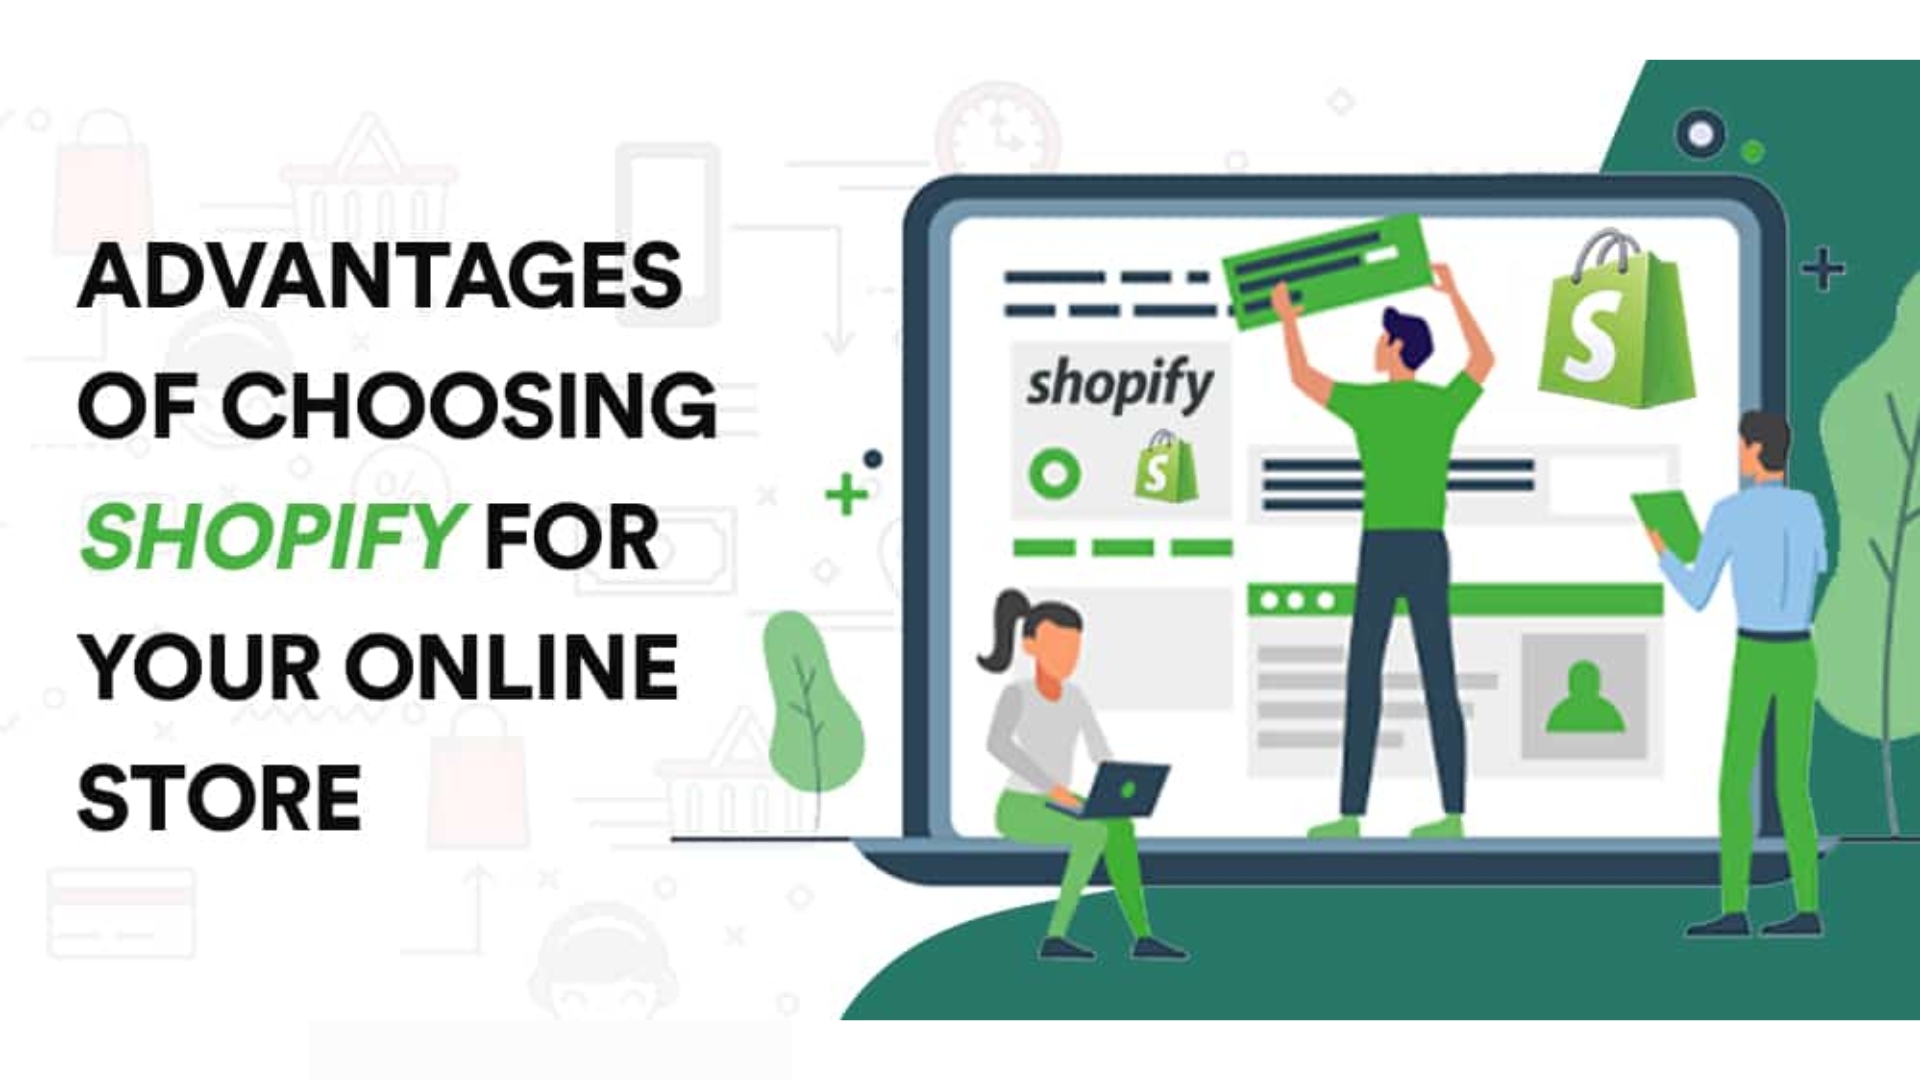 Why Choose Shopify for Your Website?